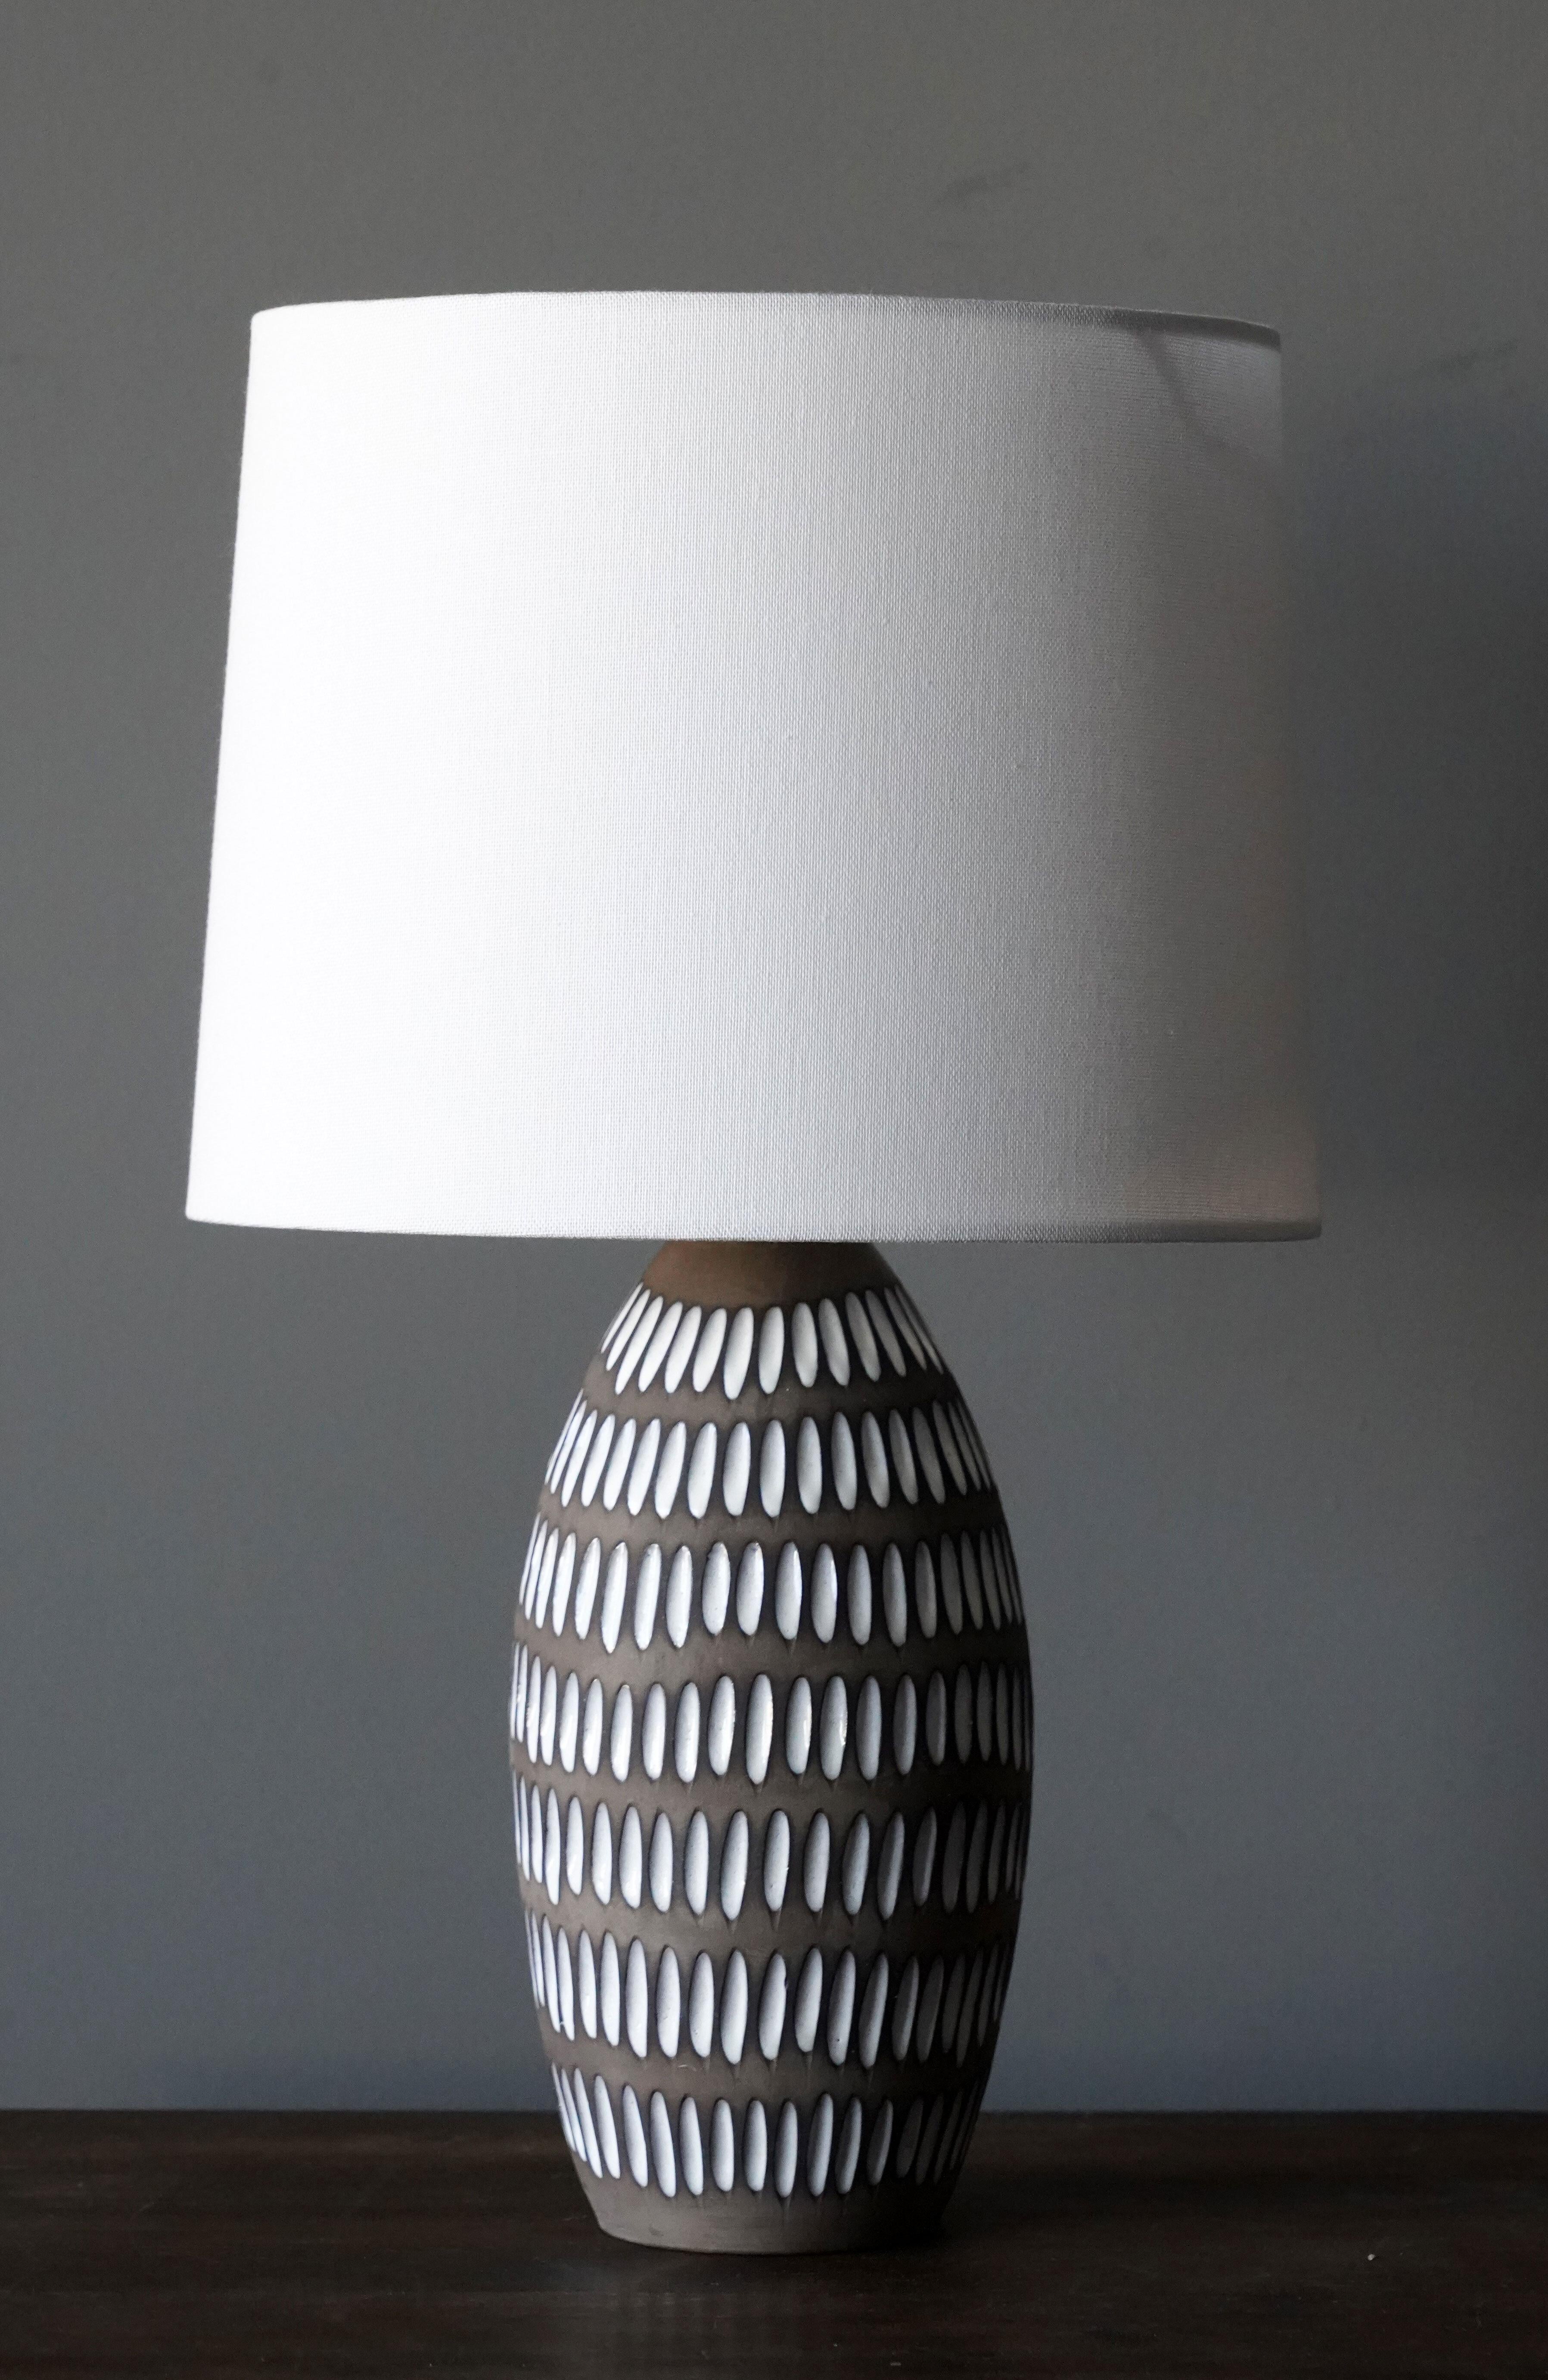 A table lamp designed by Ingrid Atterberg. Produced by Upsala Ekeby, Sweden, 1950s. Stamped.

Sold without lampshade. Stated measurements exclude lampshade.

Other designers of the period include Axel Salto, Paavo Tynell, Lisa Johansson-Pape,